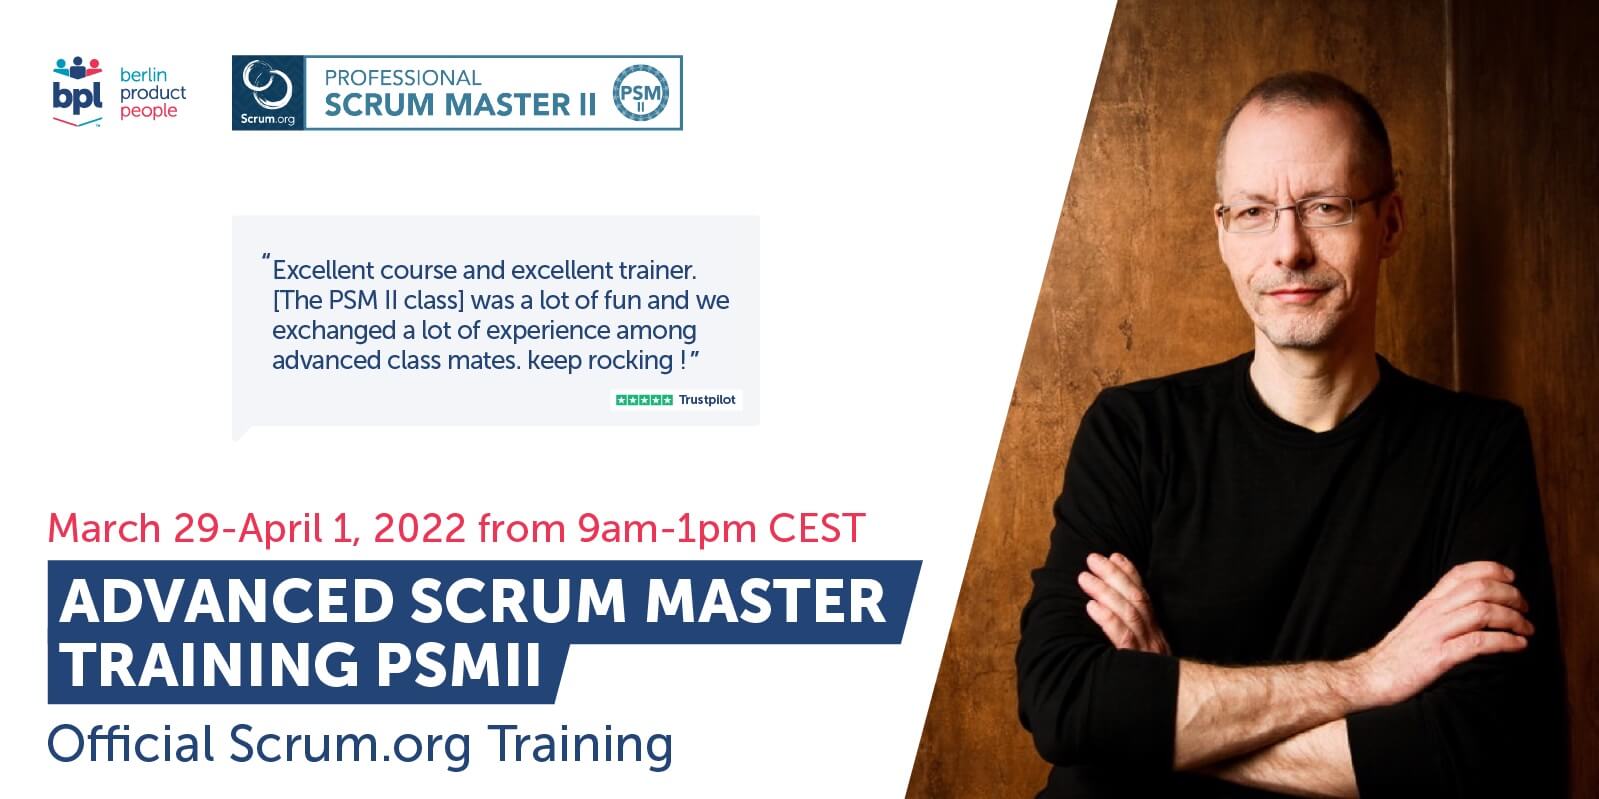 Advanced Professional Scrum Master Online Training w/ PSM II Certificate — March 29 to April 1, 2022 — Berlin Product People GmbH